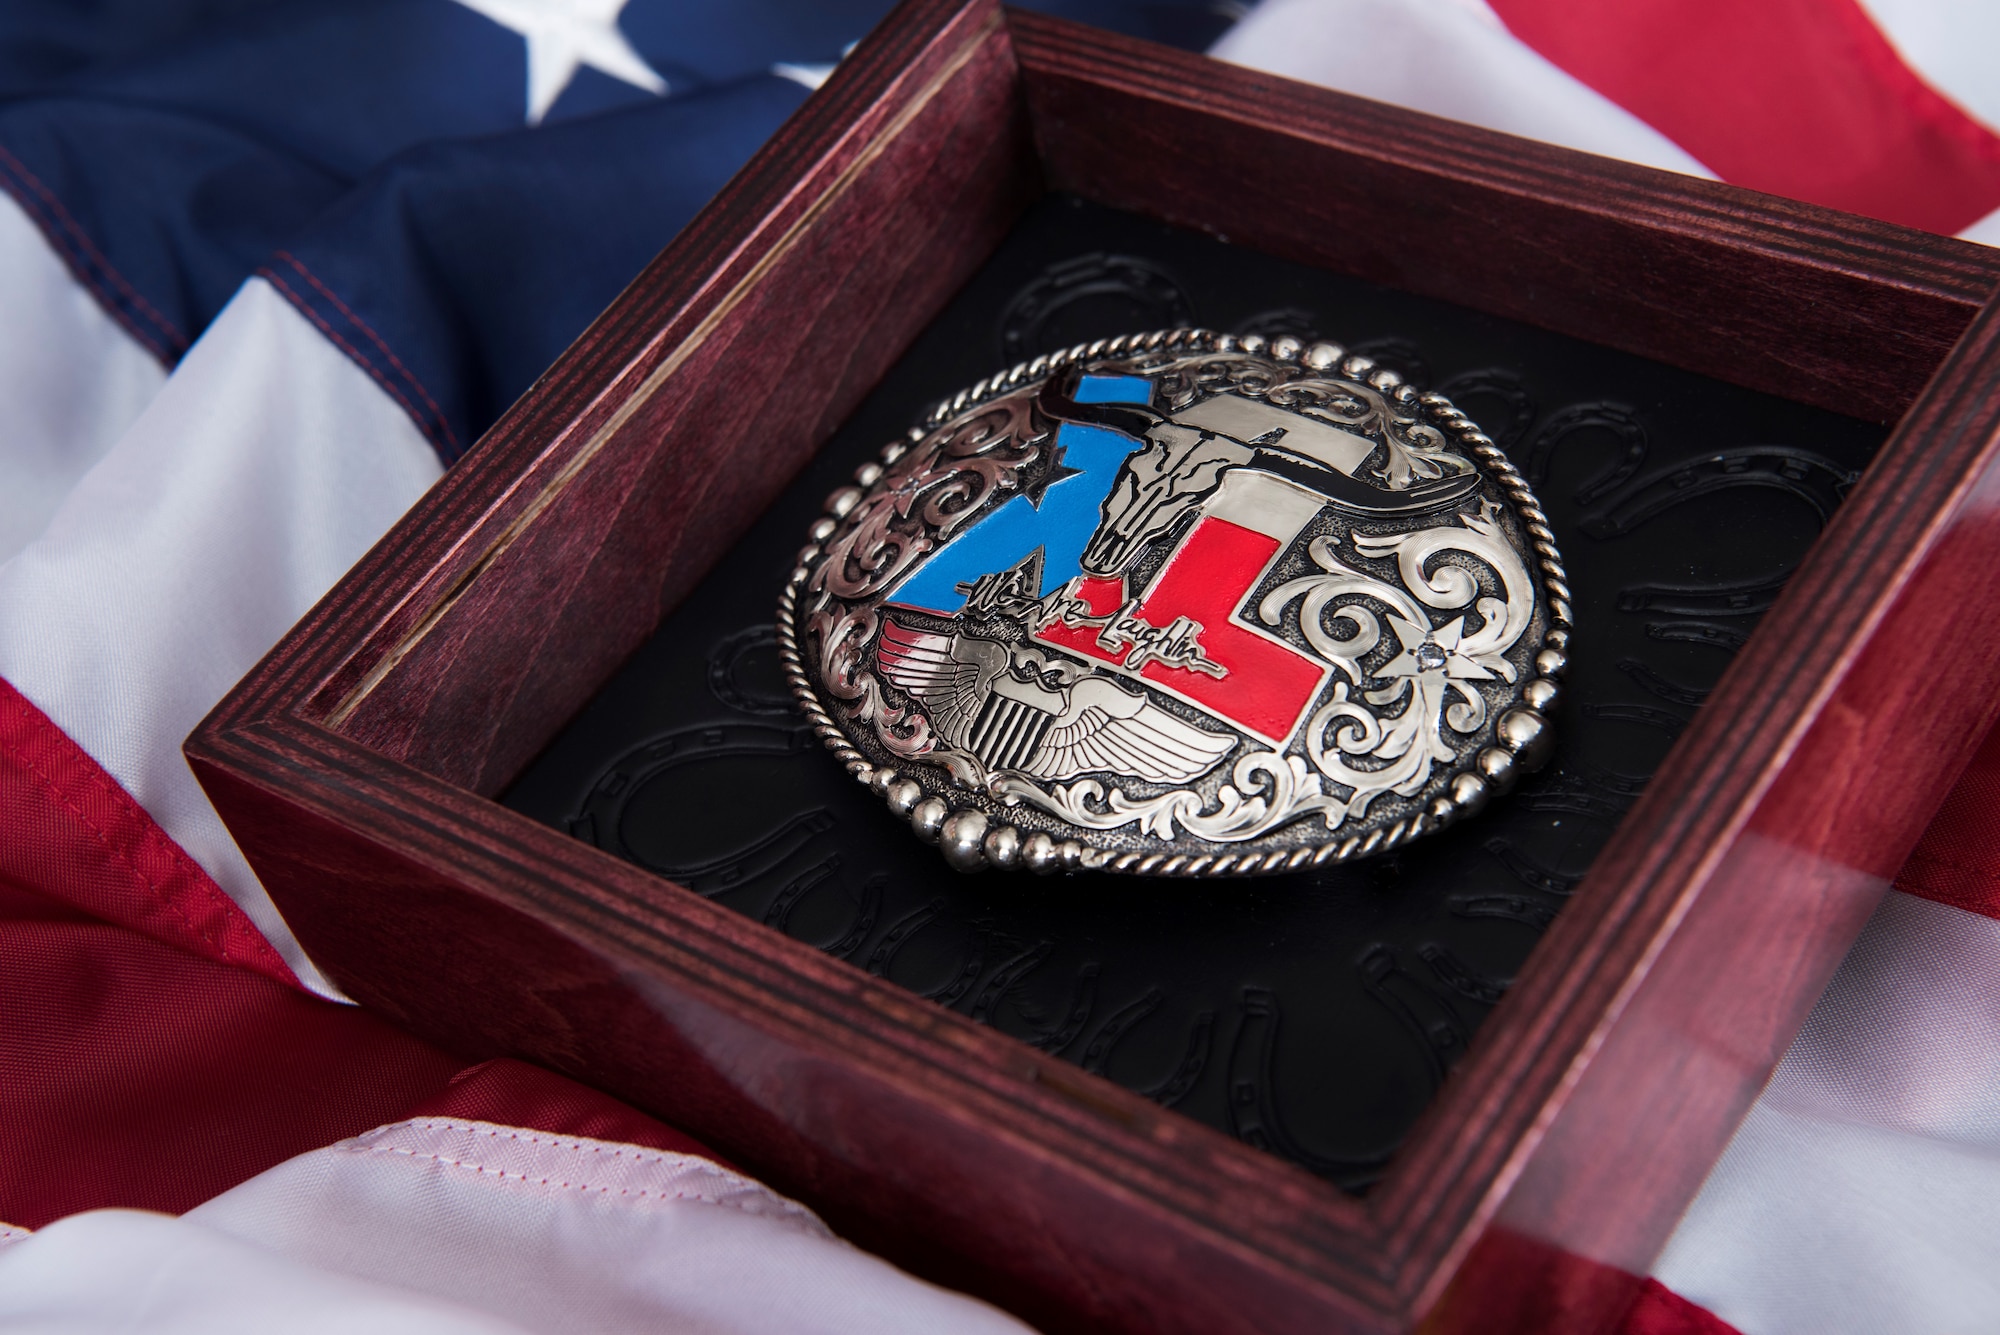 A custom belt buckle, designed for the wing’s newly inducted lifetime Honorary Commander lays in its shadow box at Laughlin Air Force Base, Texas, July 17, 2019. Nominations for this elite lifetime program, formally known as Laughlin’s Wings of Amistad, are not guaranteed during each commander’s tenure; however, each nominee exhibits a lifetime impact on this base community. (U.S. Air Force photo by Airman 1st Class Marco A. Gomez)